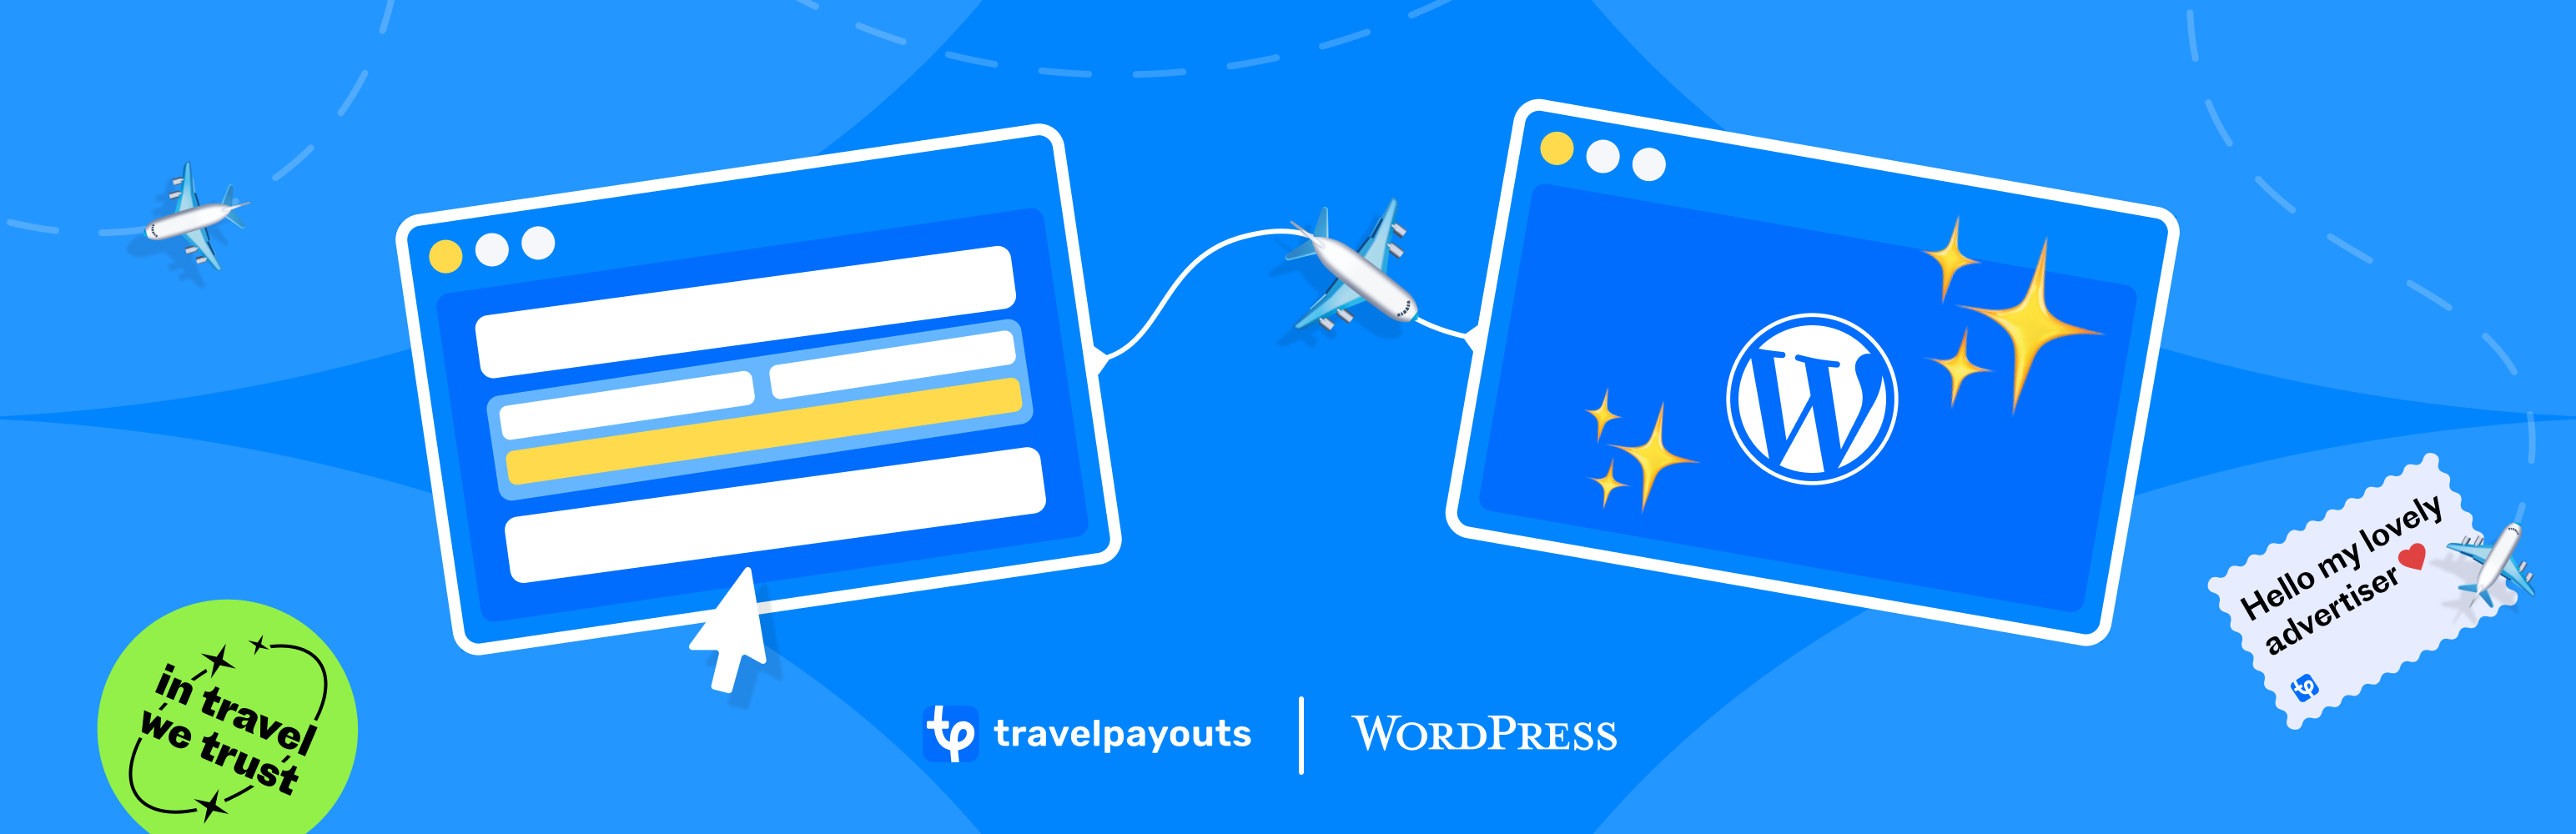 Travelpayouts: All Travel Brands in One Place